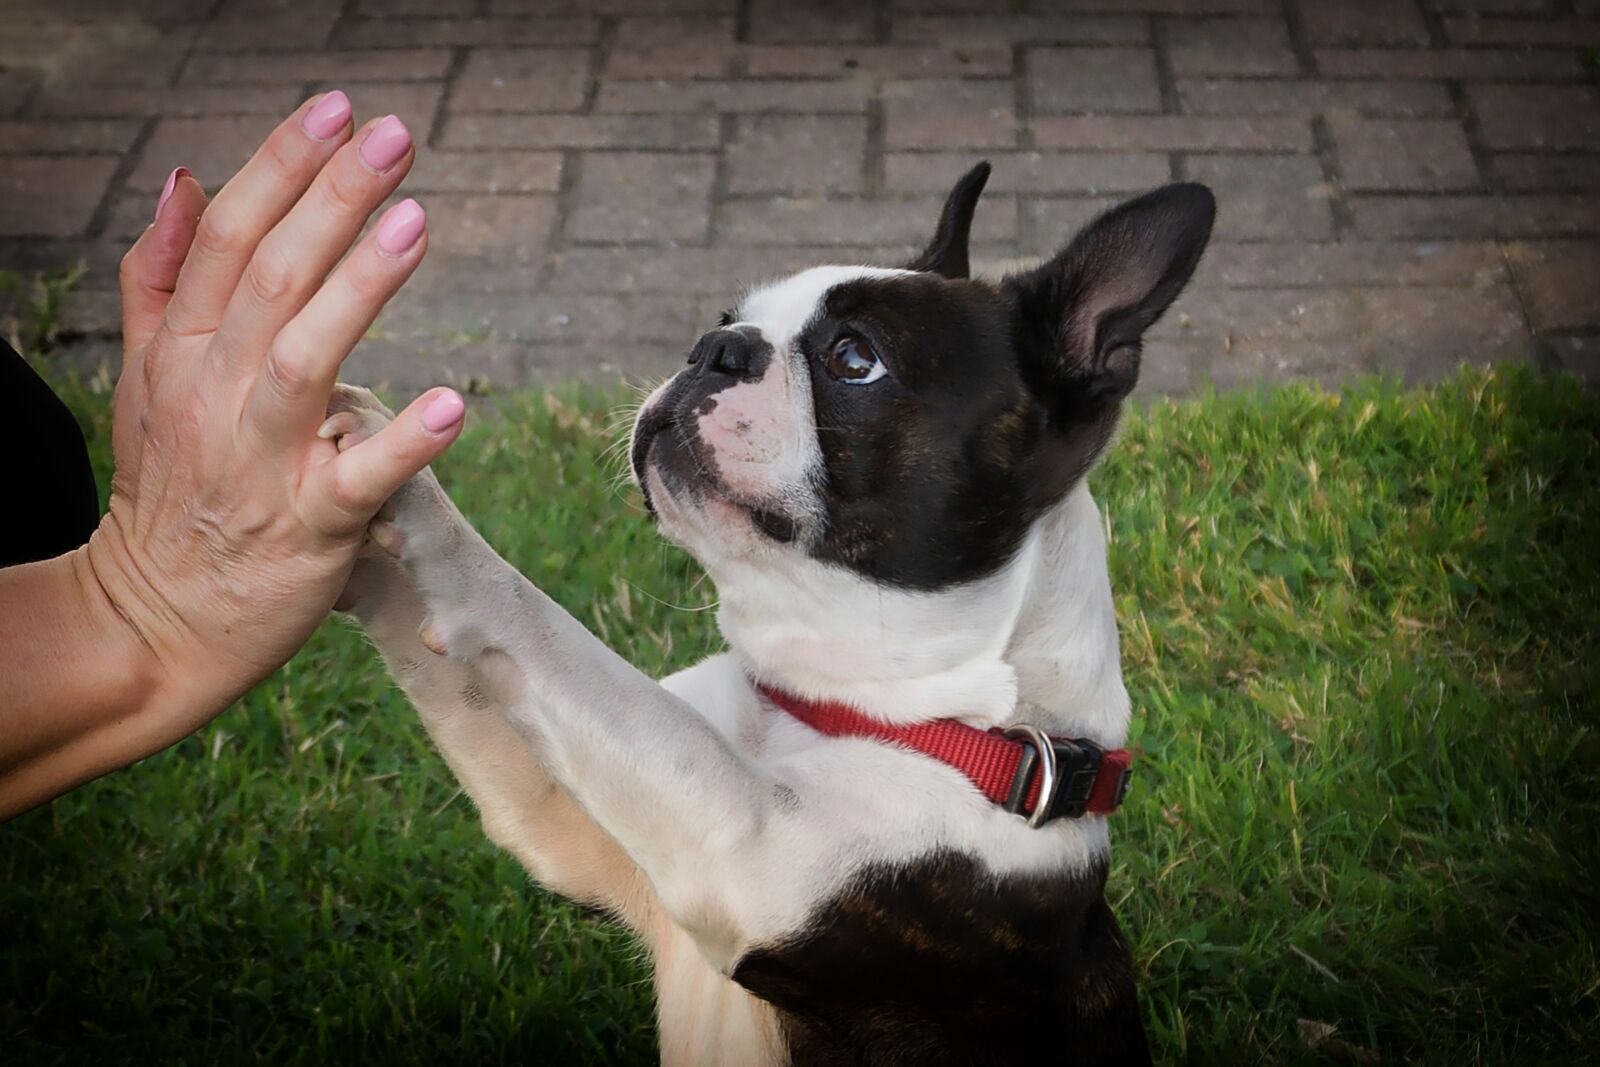 Sony a6000 sample photo. Dog, paw, pet photography